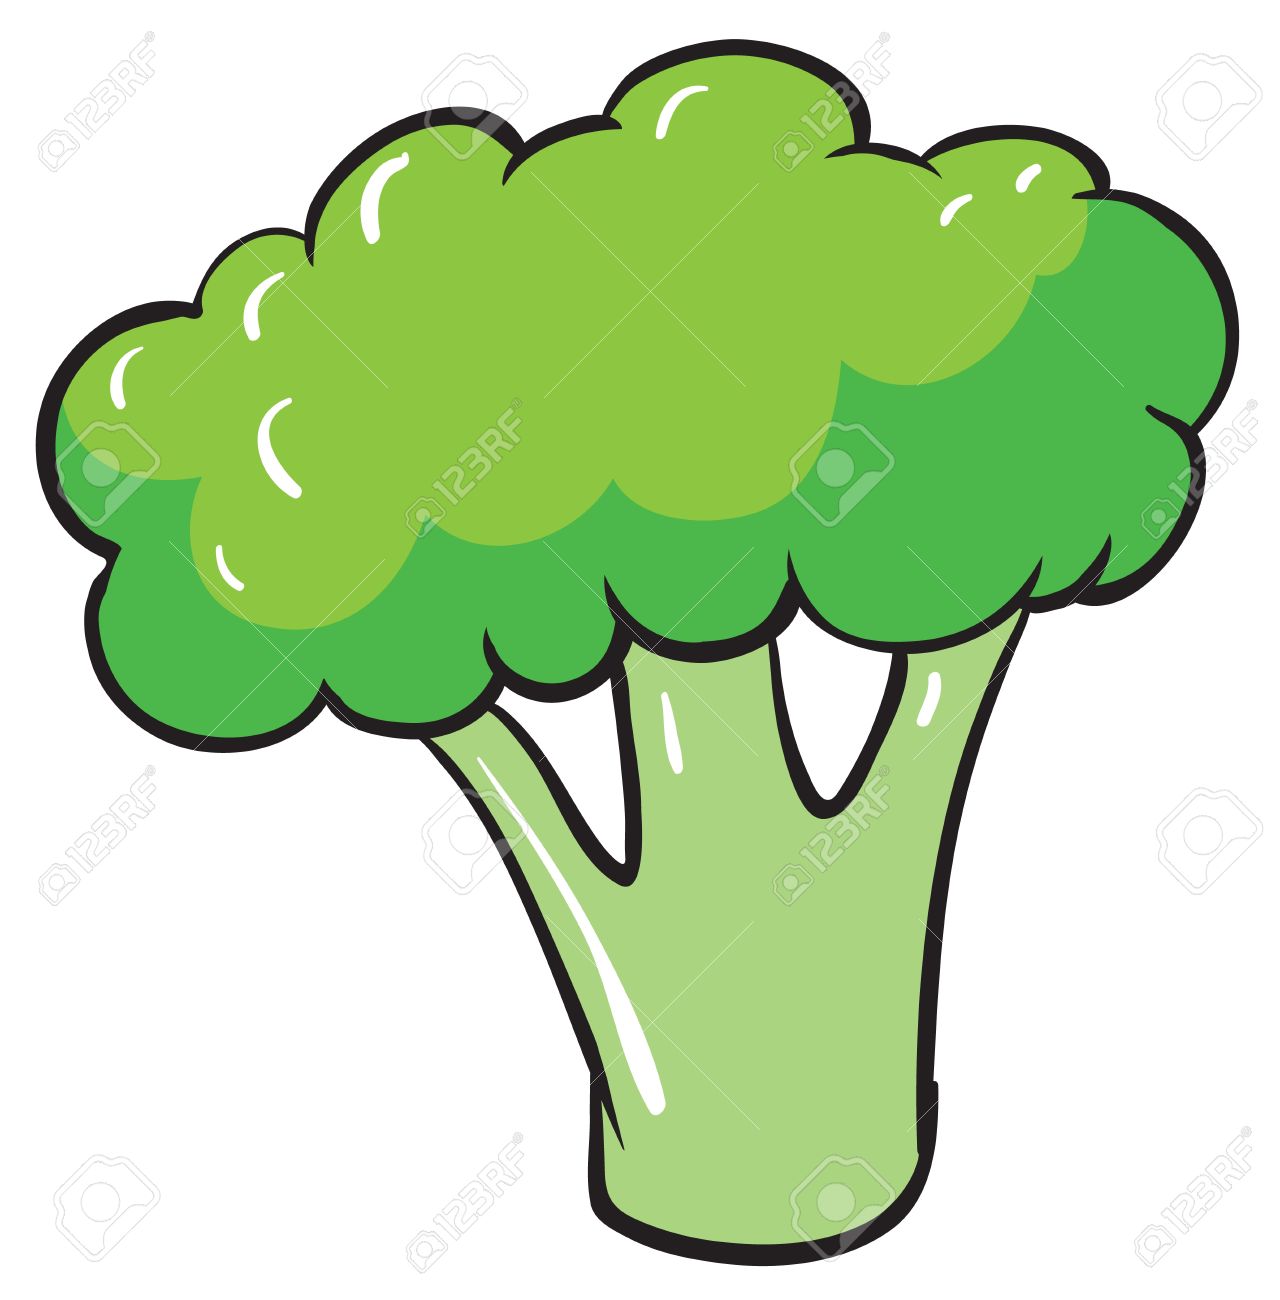 green vegetables clipart - photo #31